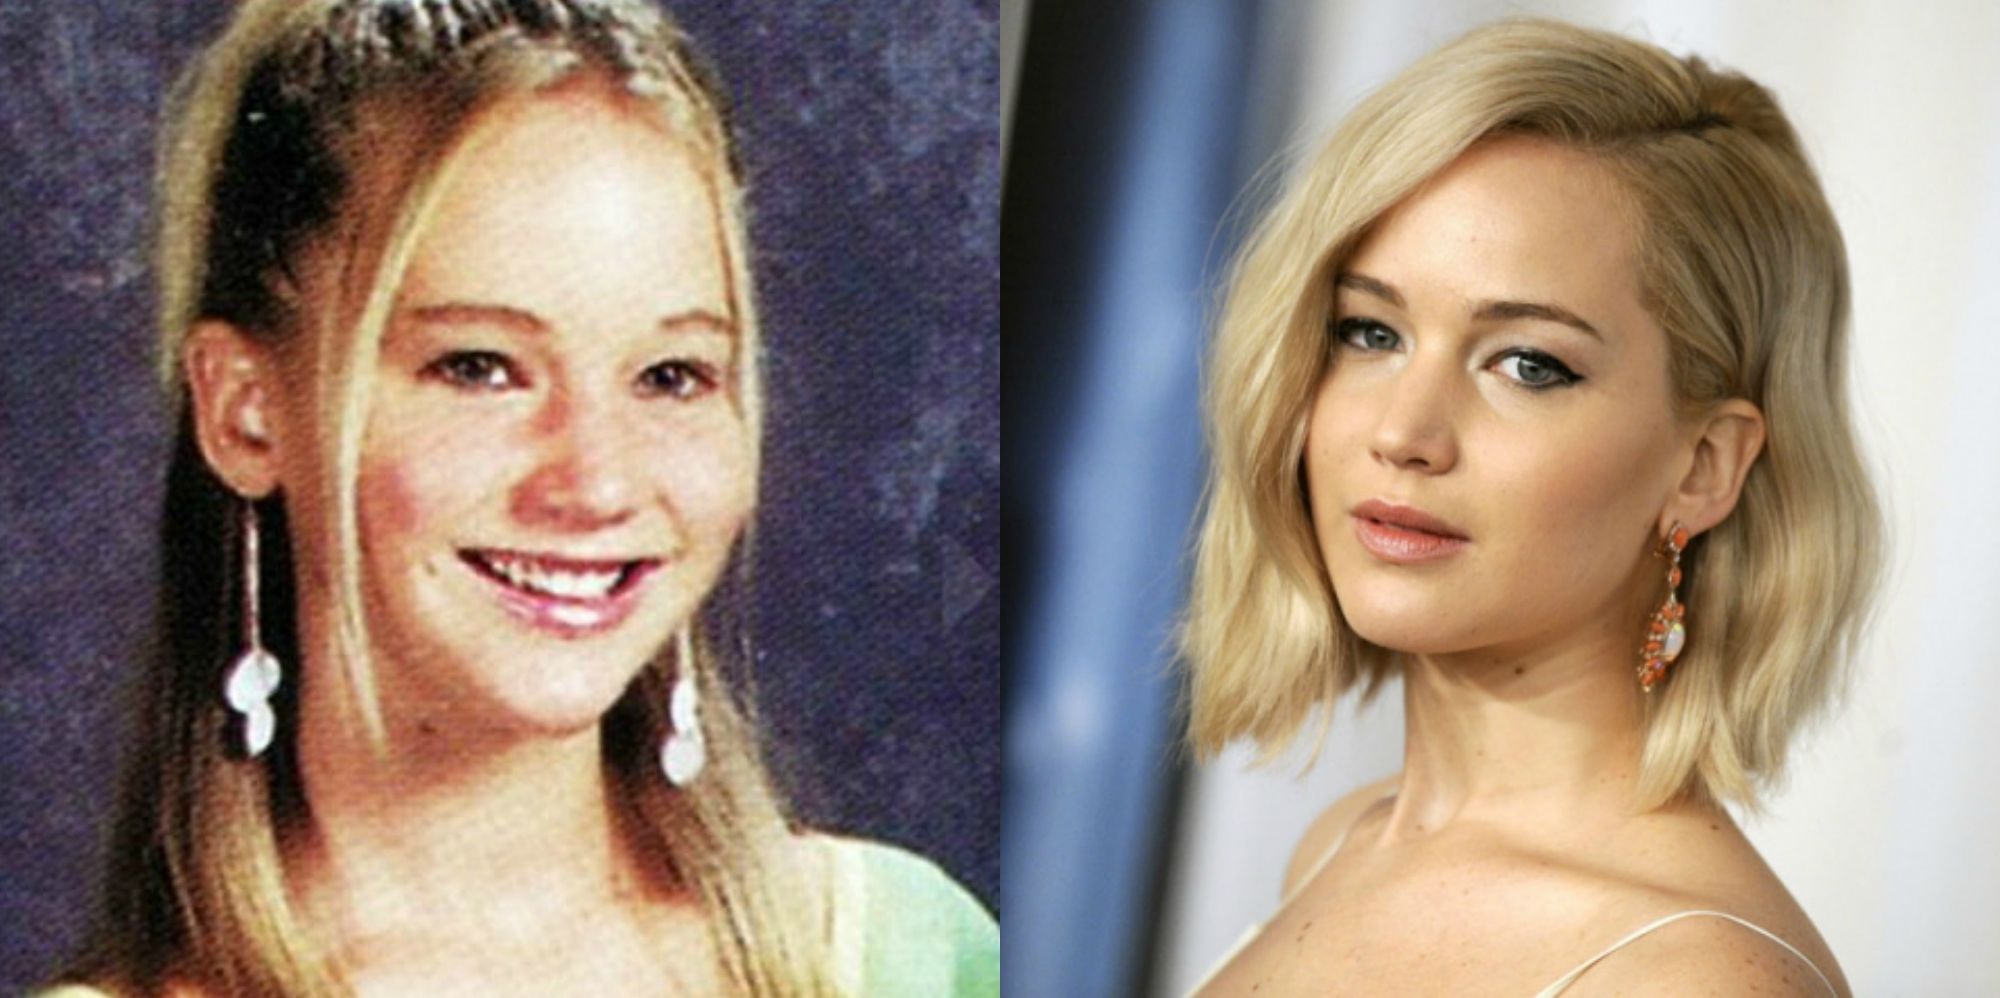 15 Celebrities You'd Never Guess Were Bullied In High School